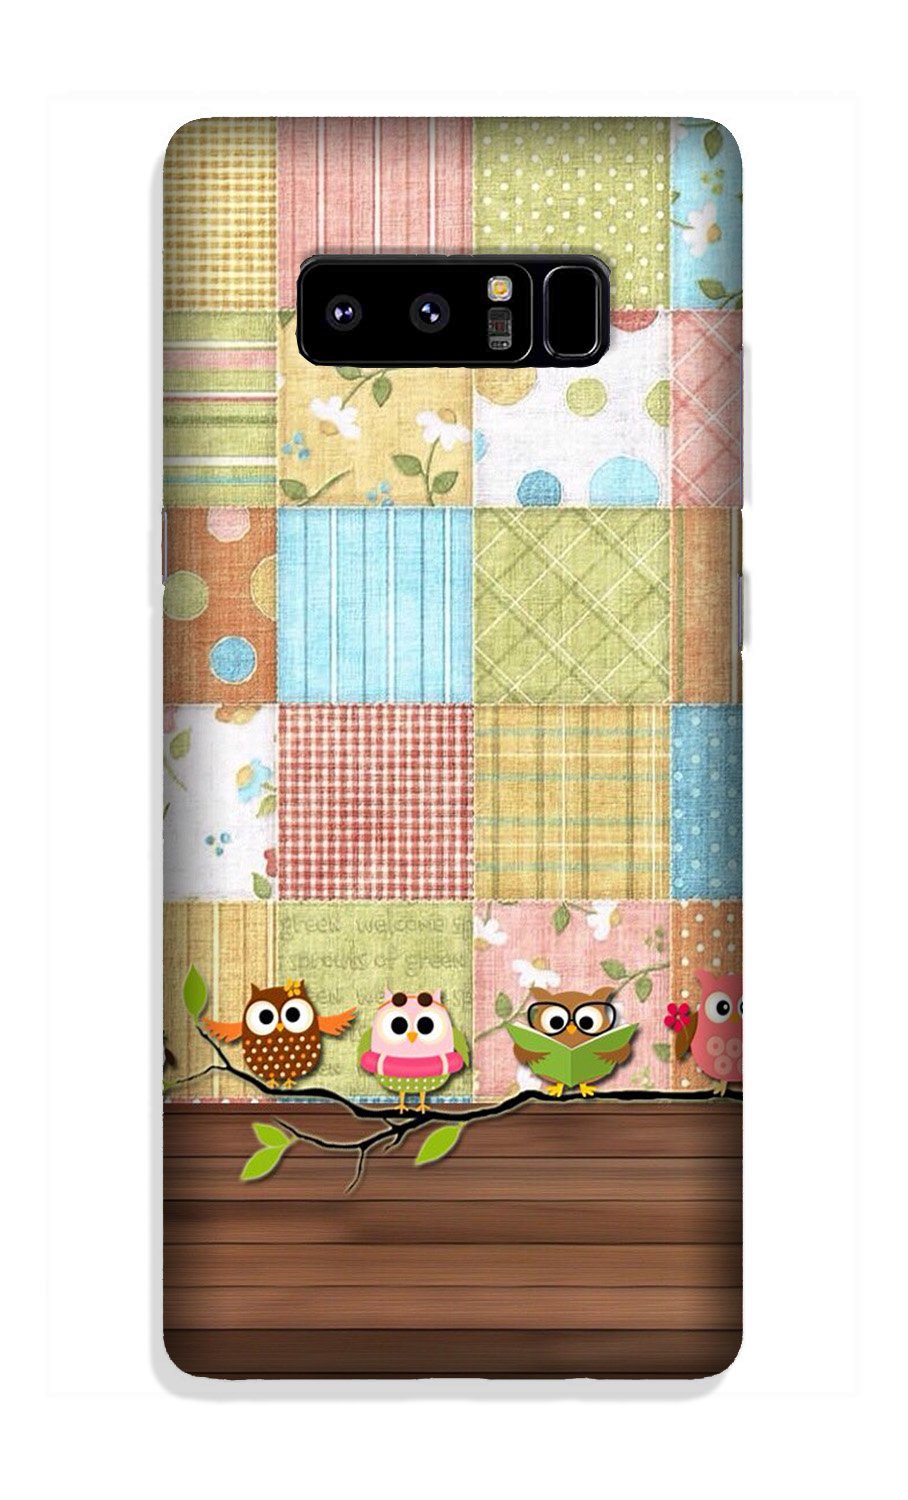 Owls Case for Galaxy Note 8 (Design - 202)